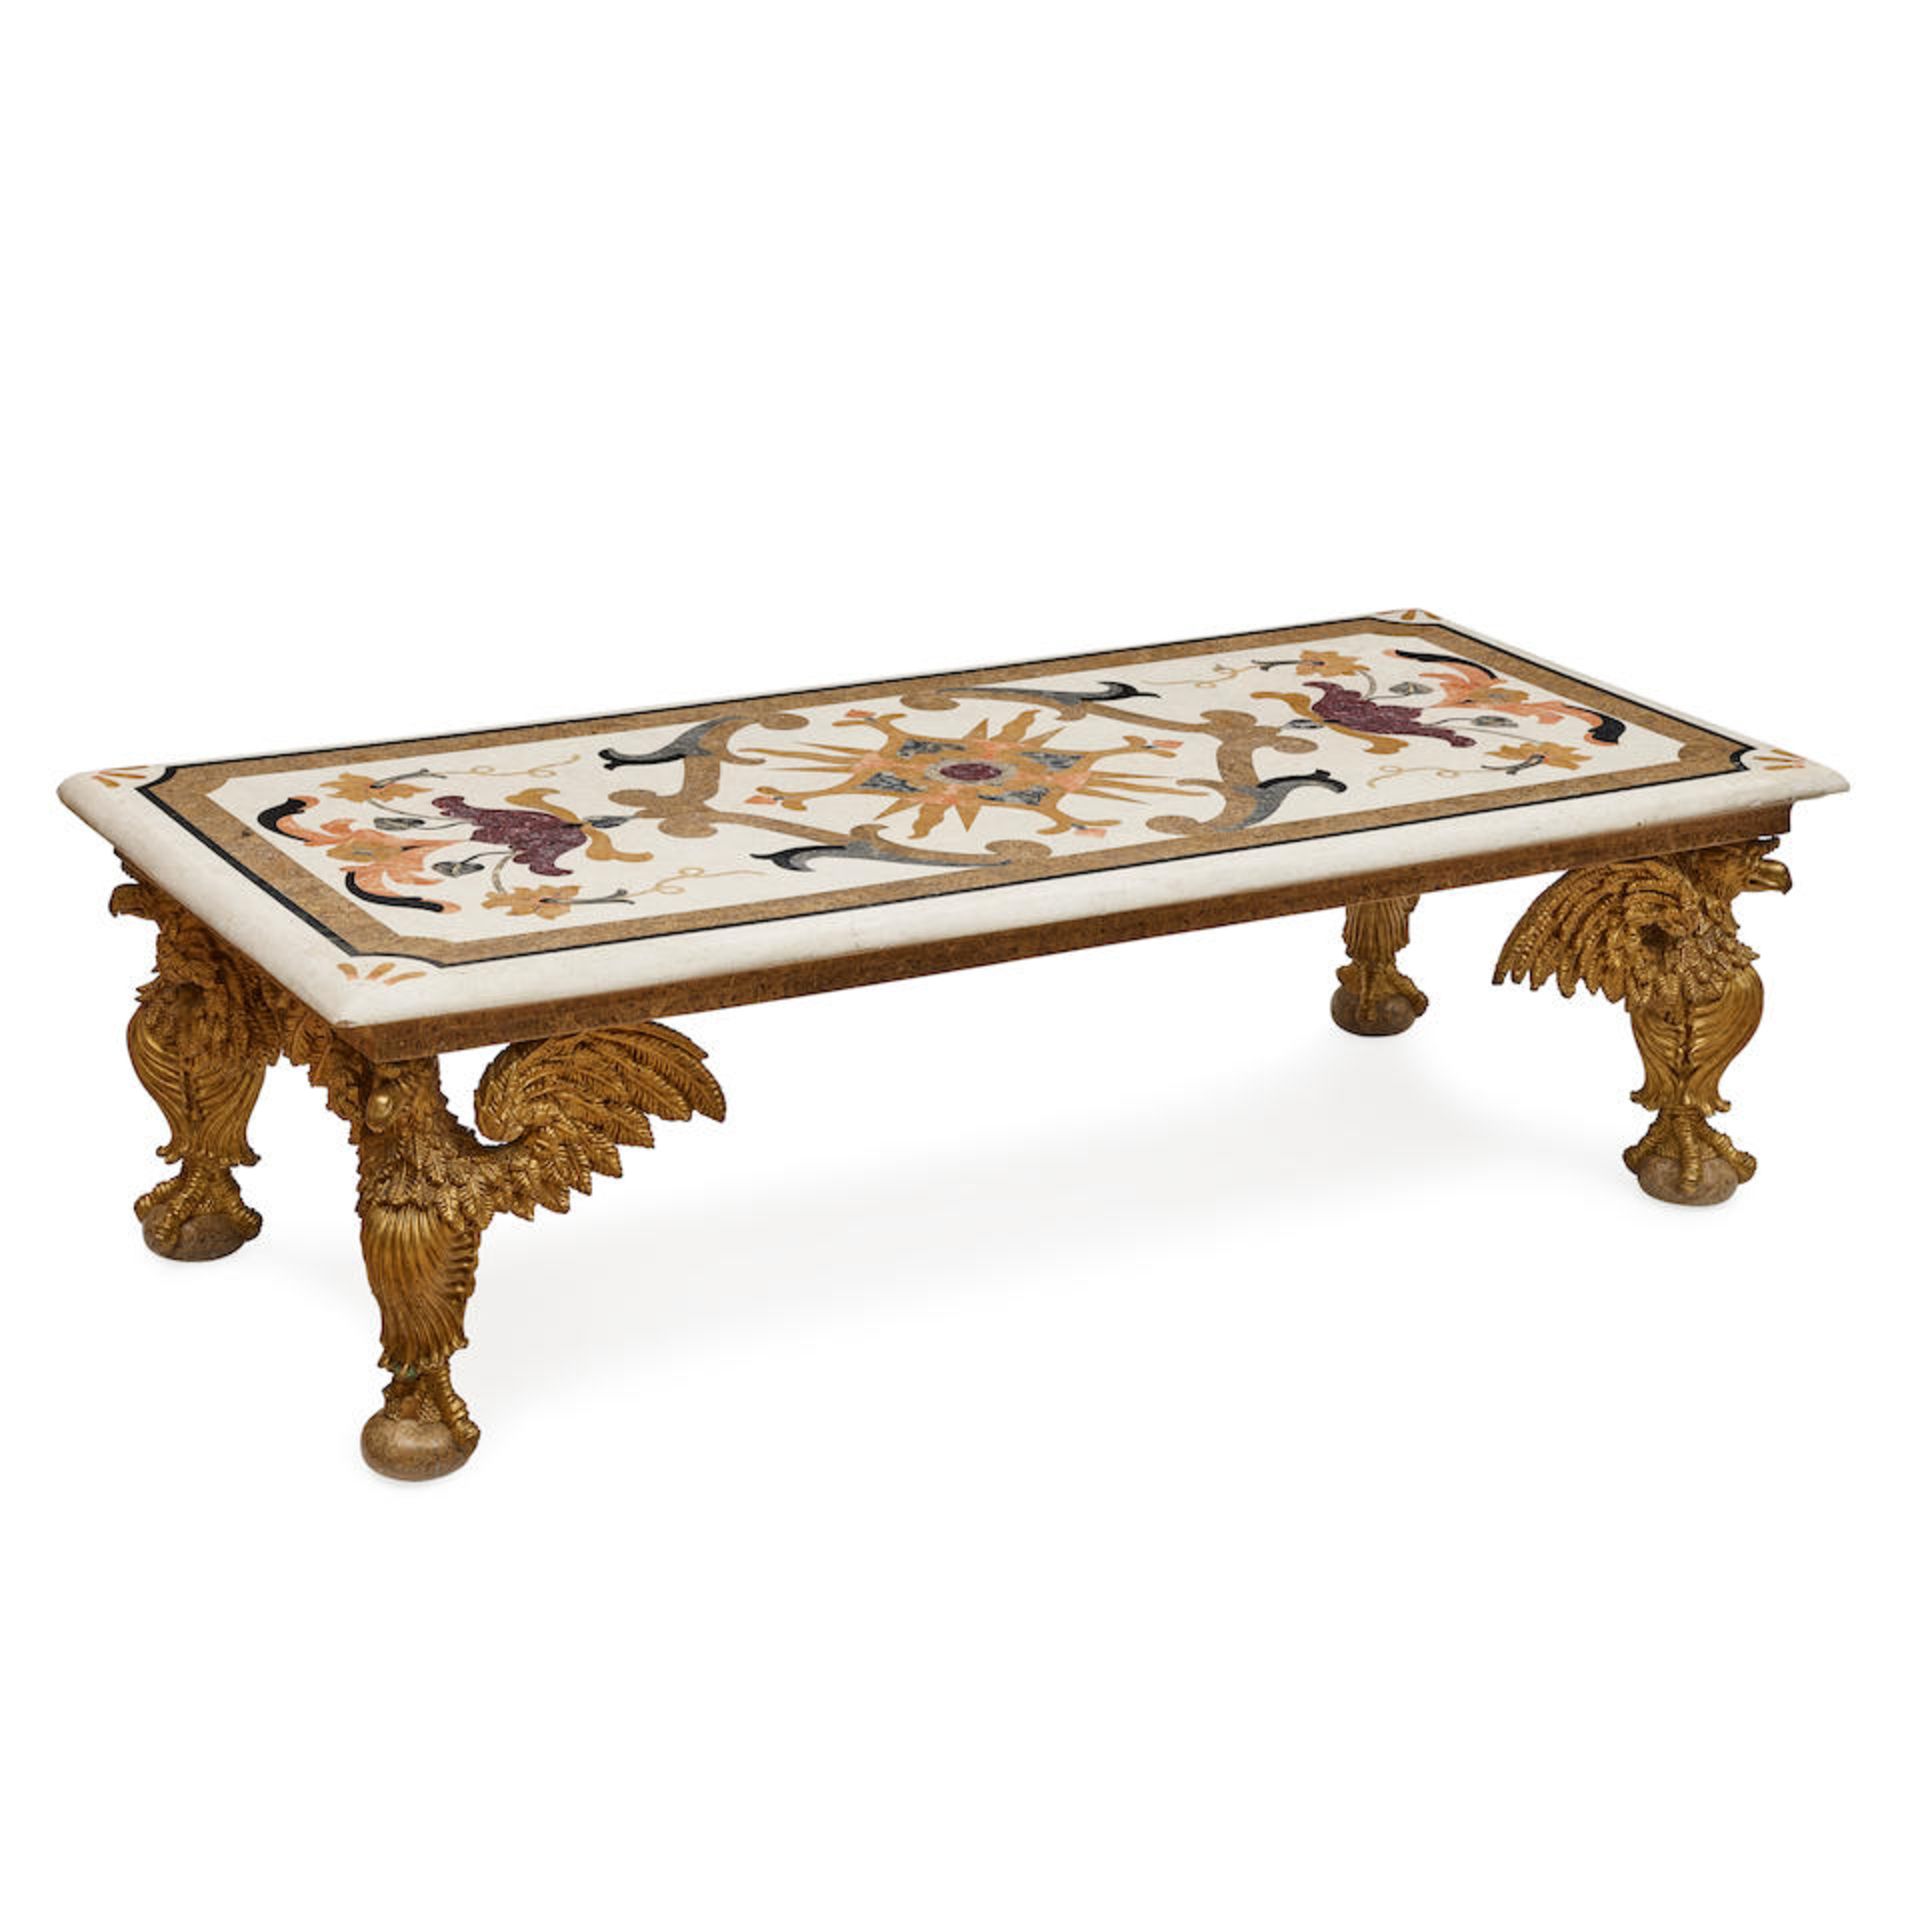 A PIETRA DURA TOP GILTWOOD LOW COFFEE TABLE